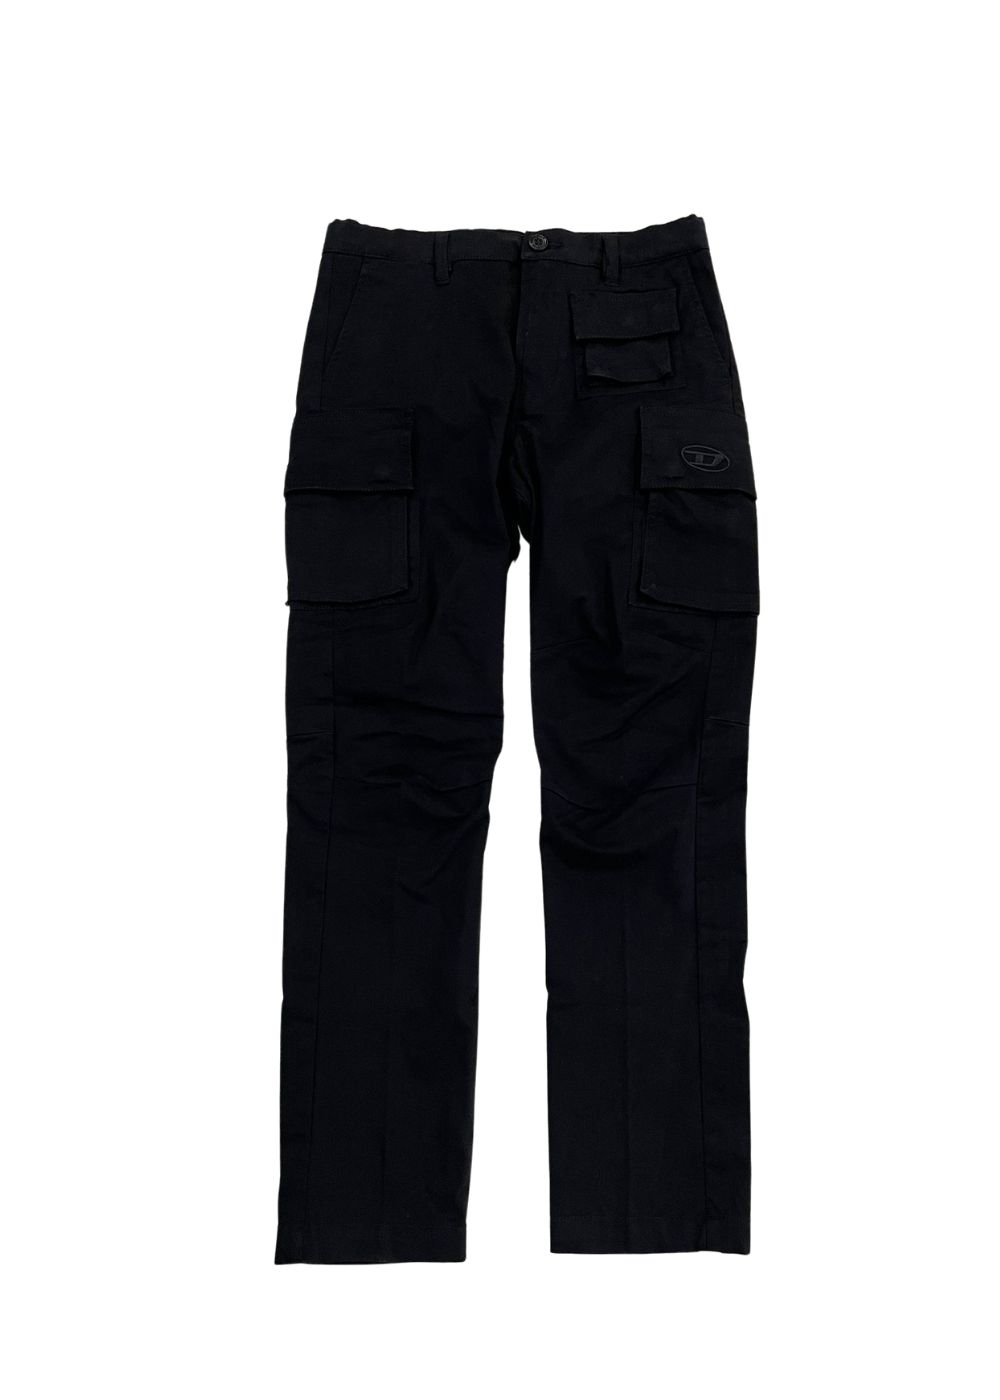 Featured image for “Diesel Pantalone Nero”